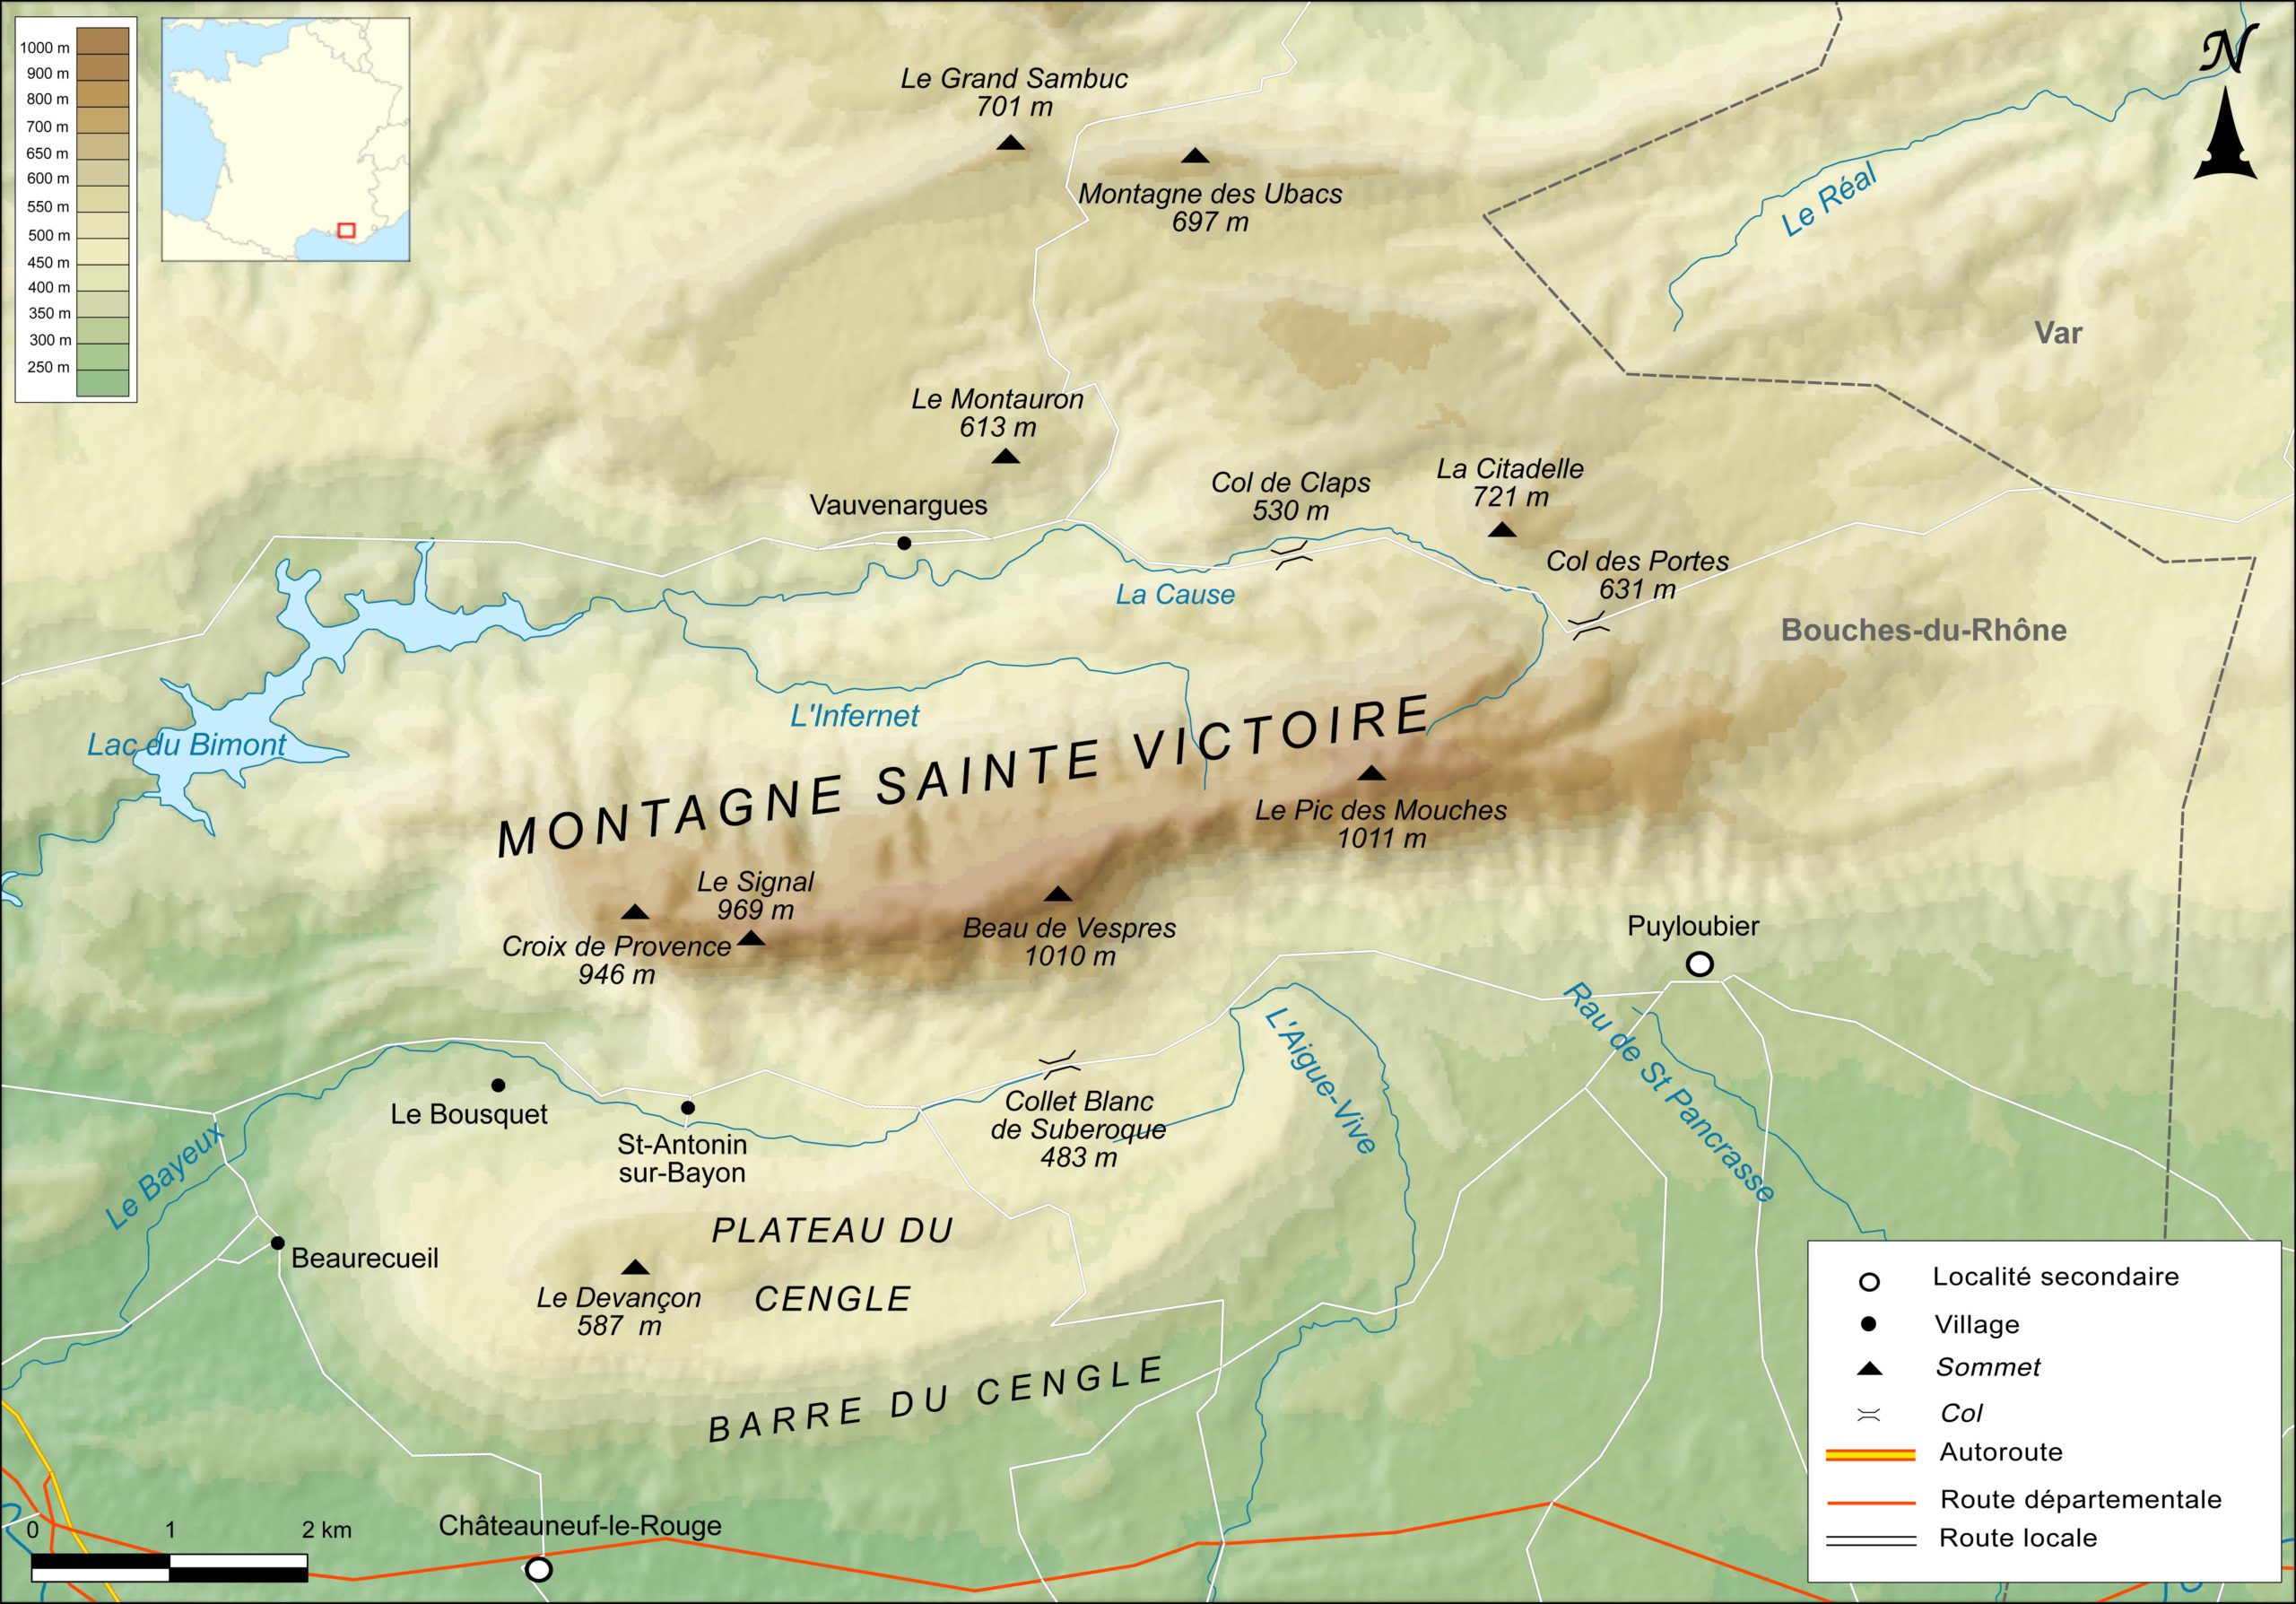 Map of Sainte-Victoire © Boldair - licence [CC BY-SA 4.0] from Wikimedia Commons